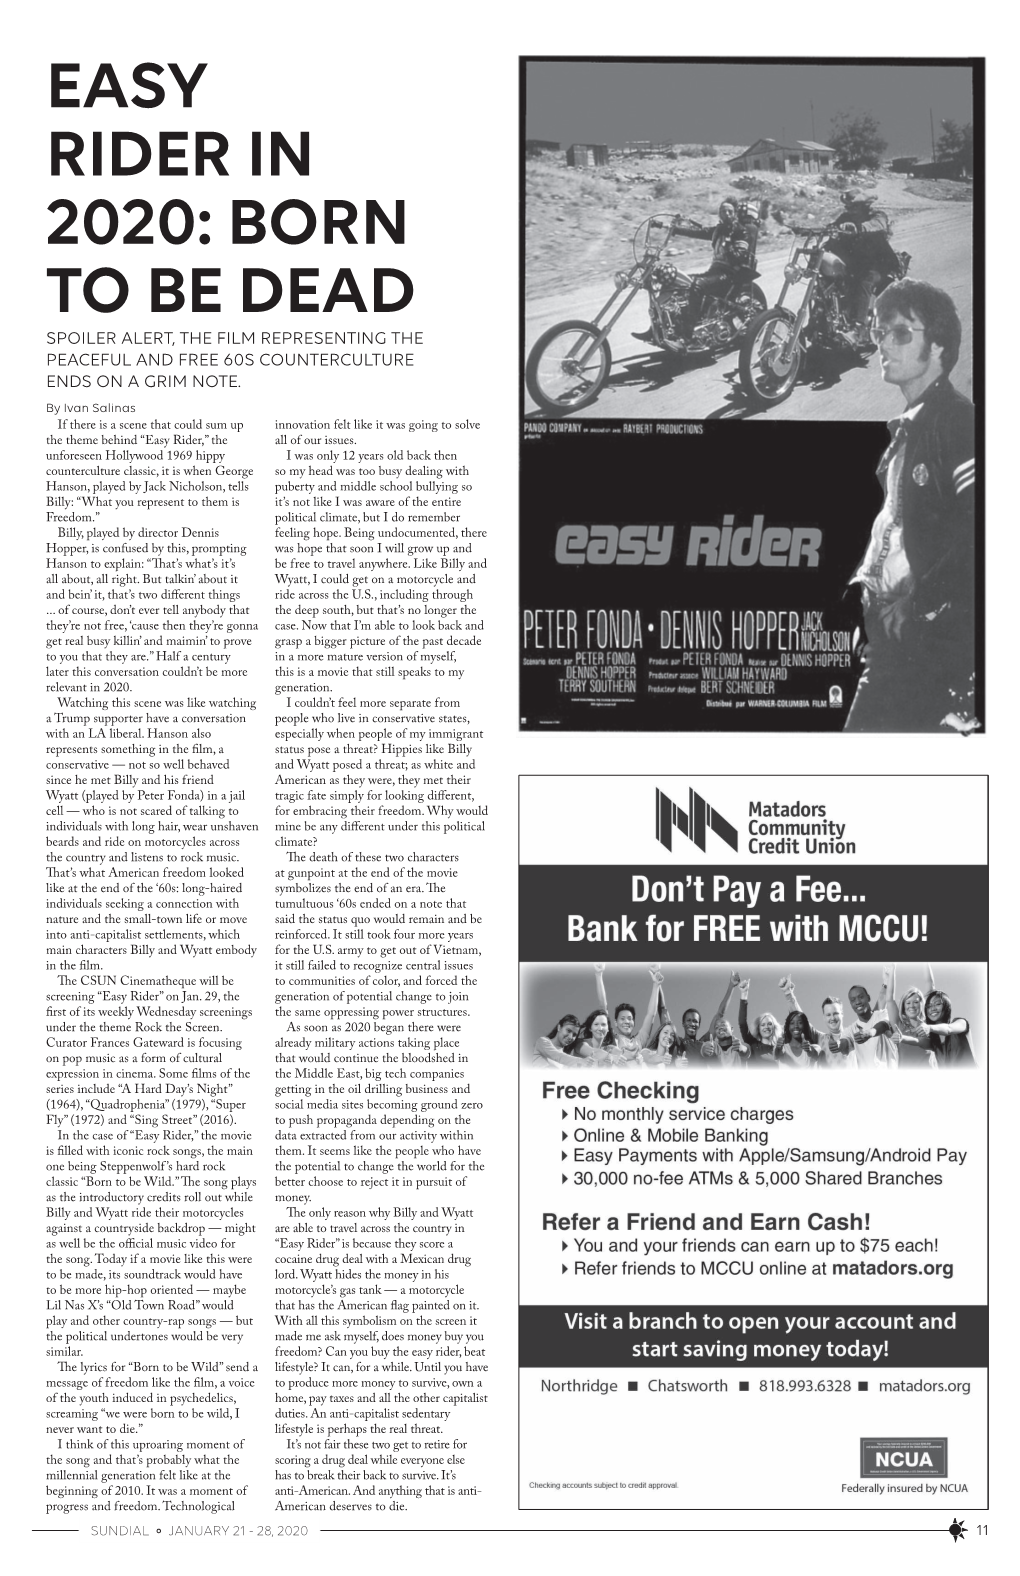 Easy Rider in 2020: Born to Be Dead Spoiler Alert, the Film Representing the Peaceful and Free 60S Counterculture Ends on a Grim Note